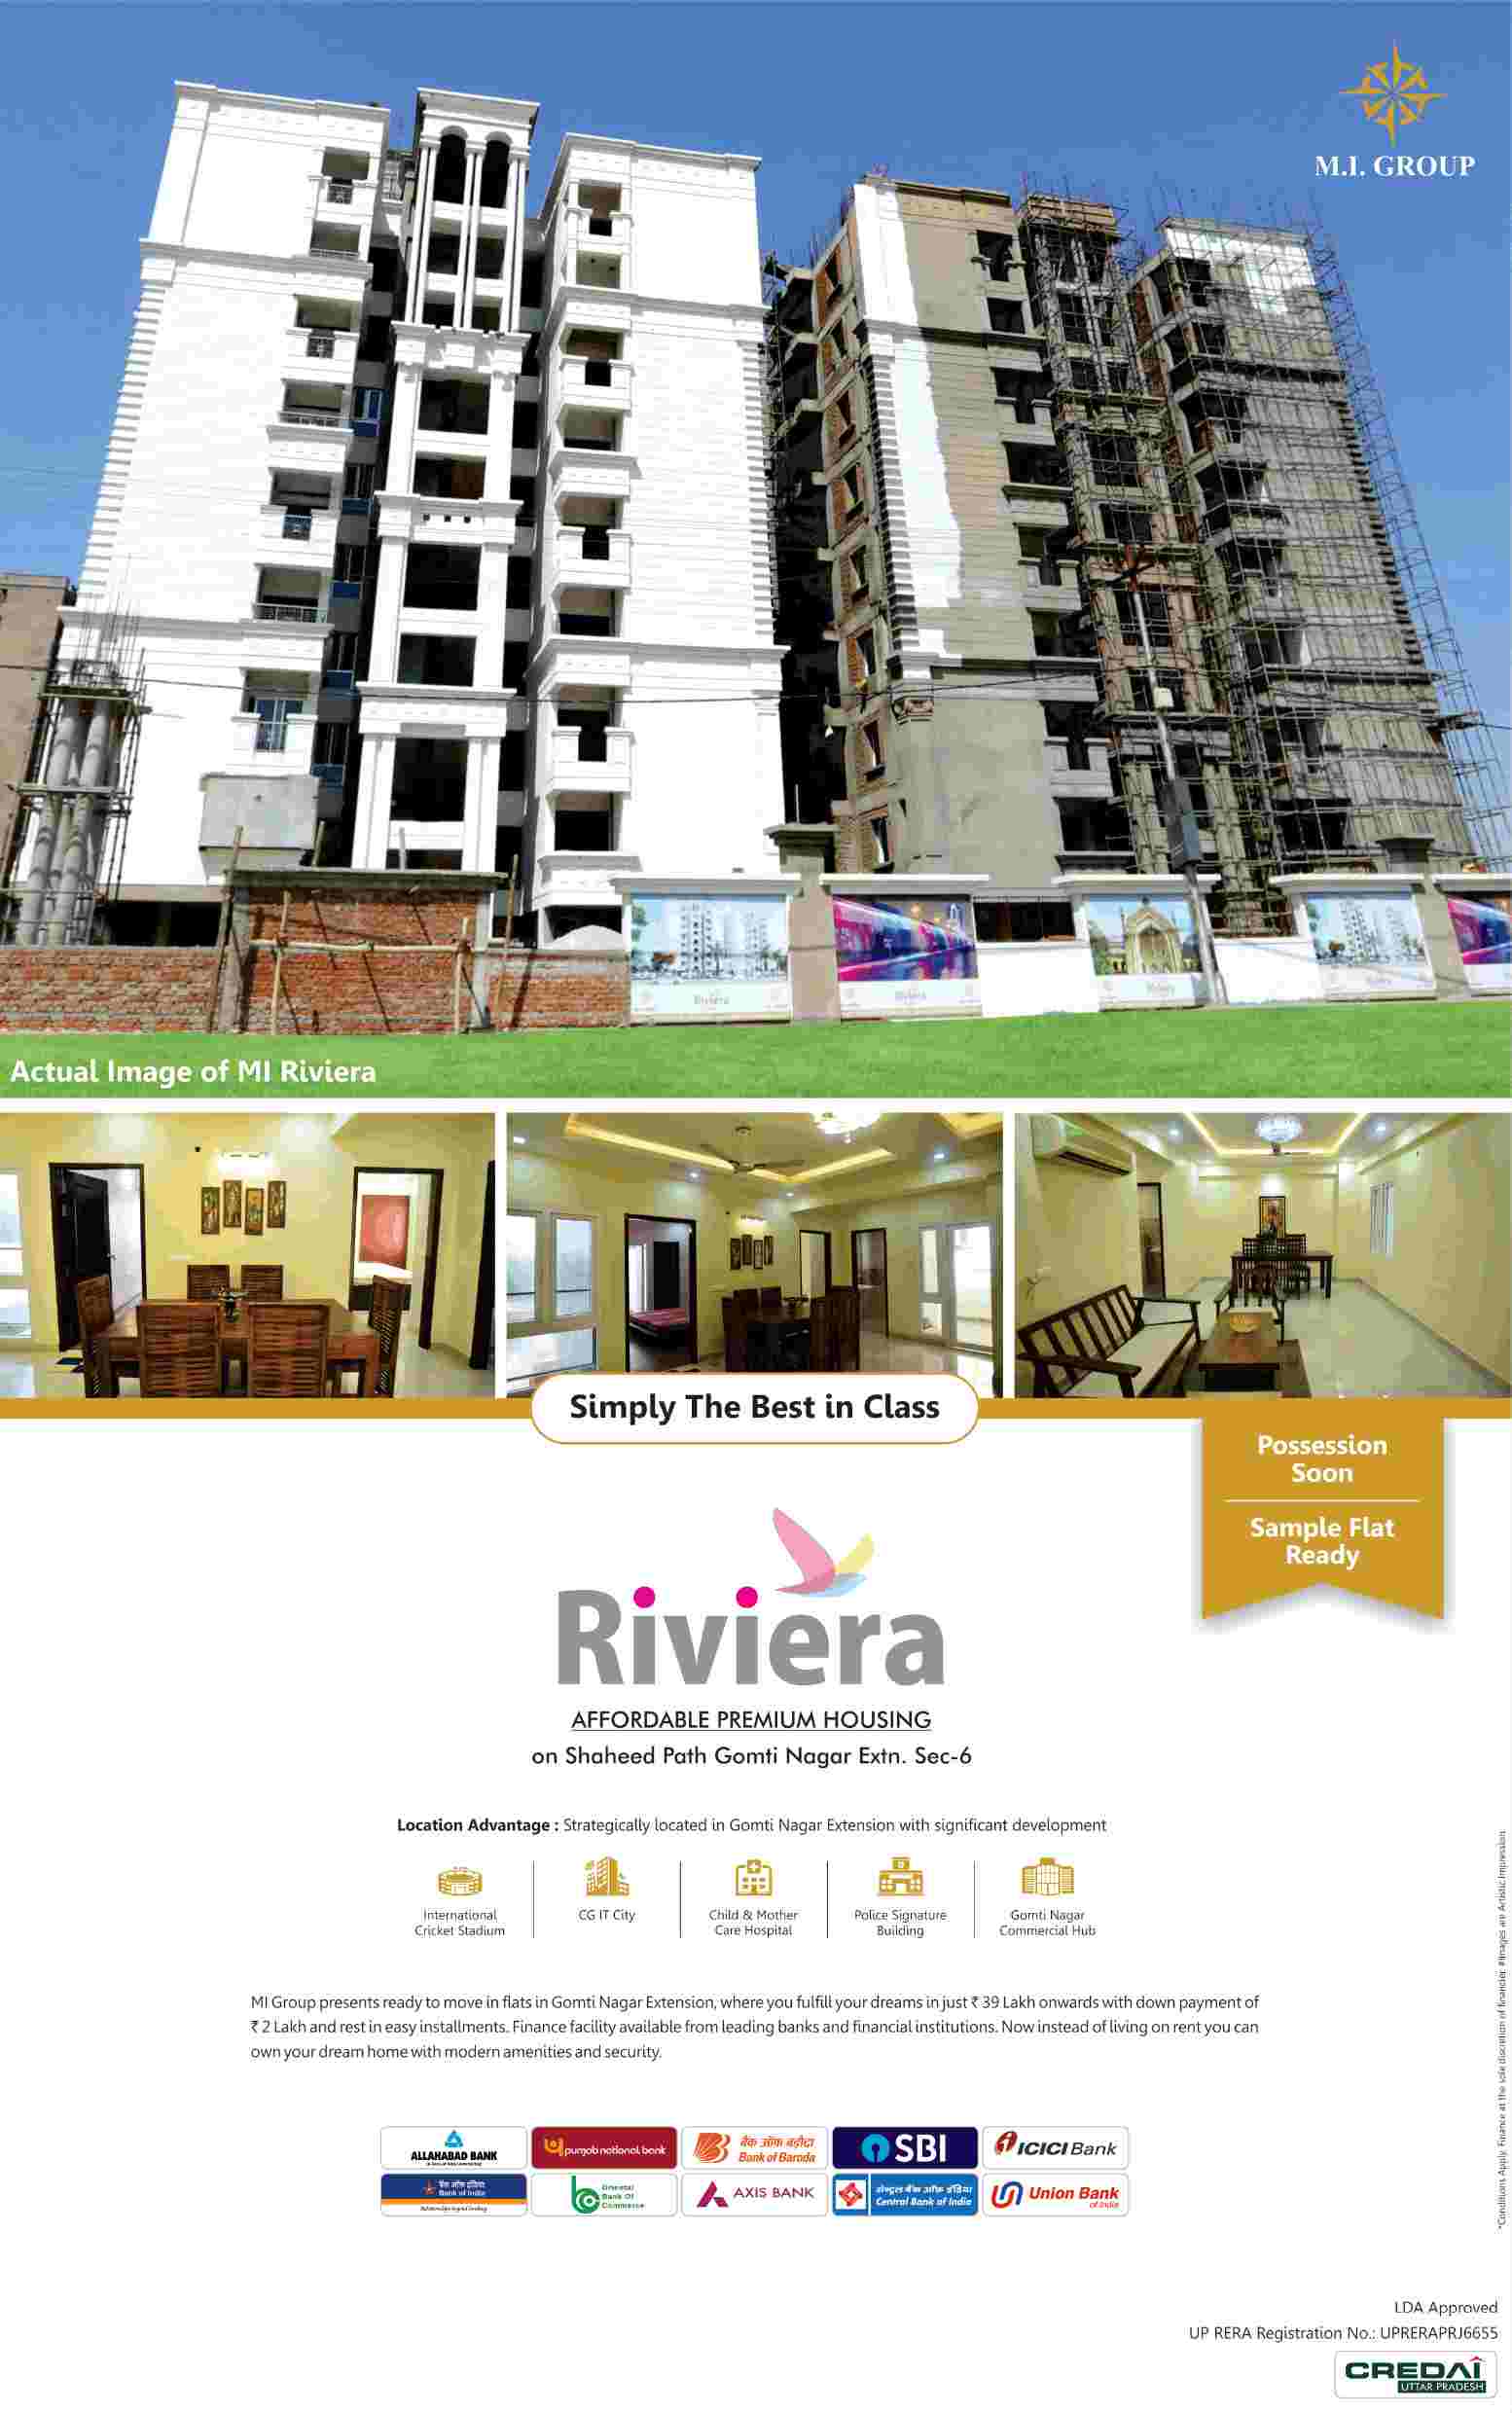 Pay just Rs. 2 lacs and book your home at MI Riviera in Lucknow Update